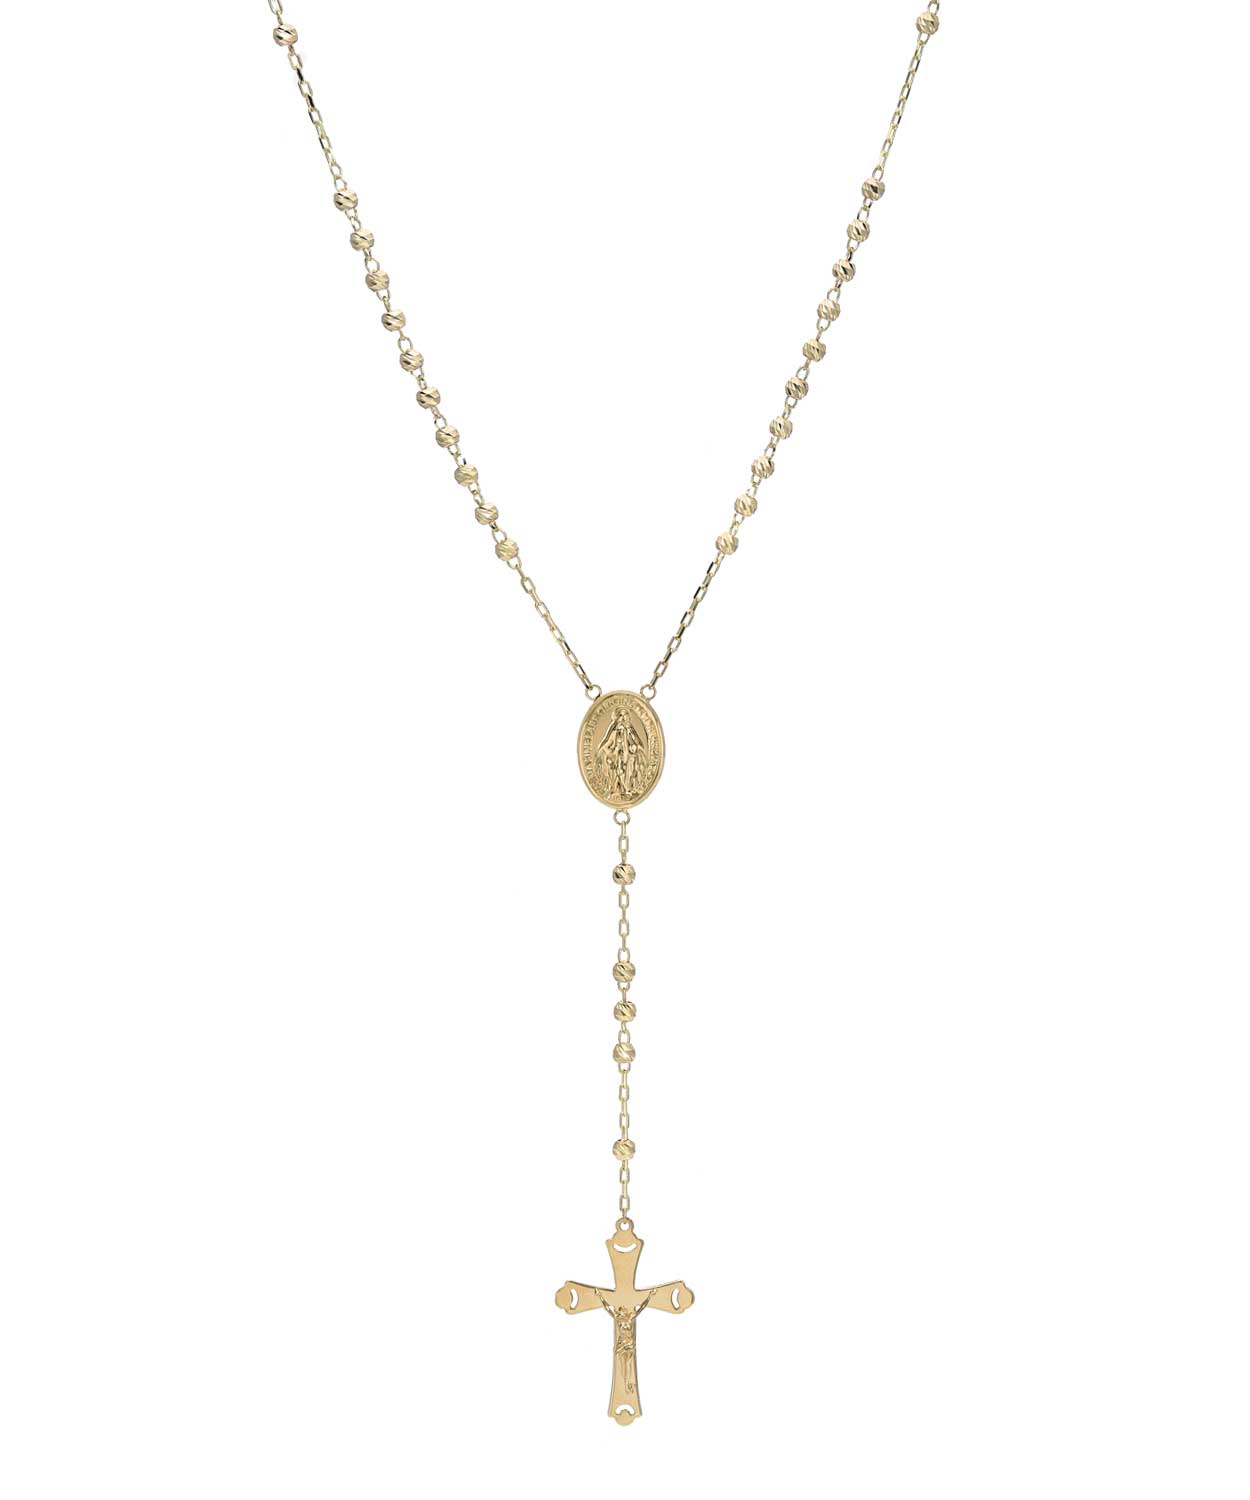 14k Gold Rosary Necklace View 1